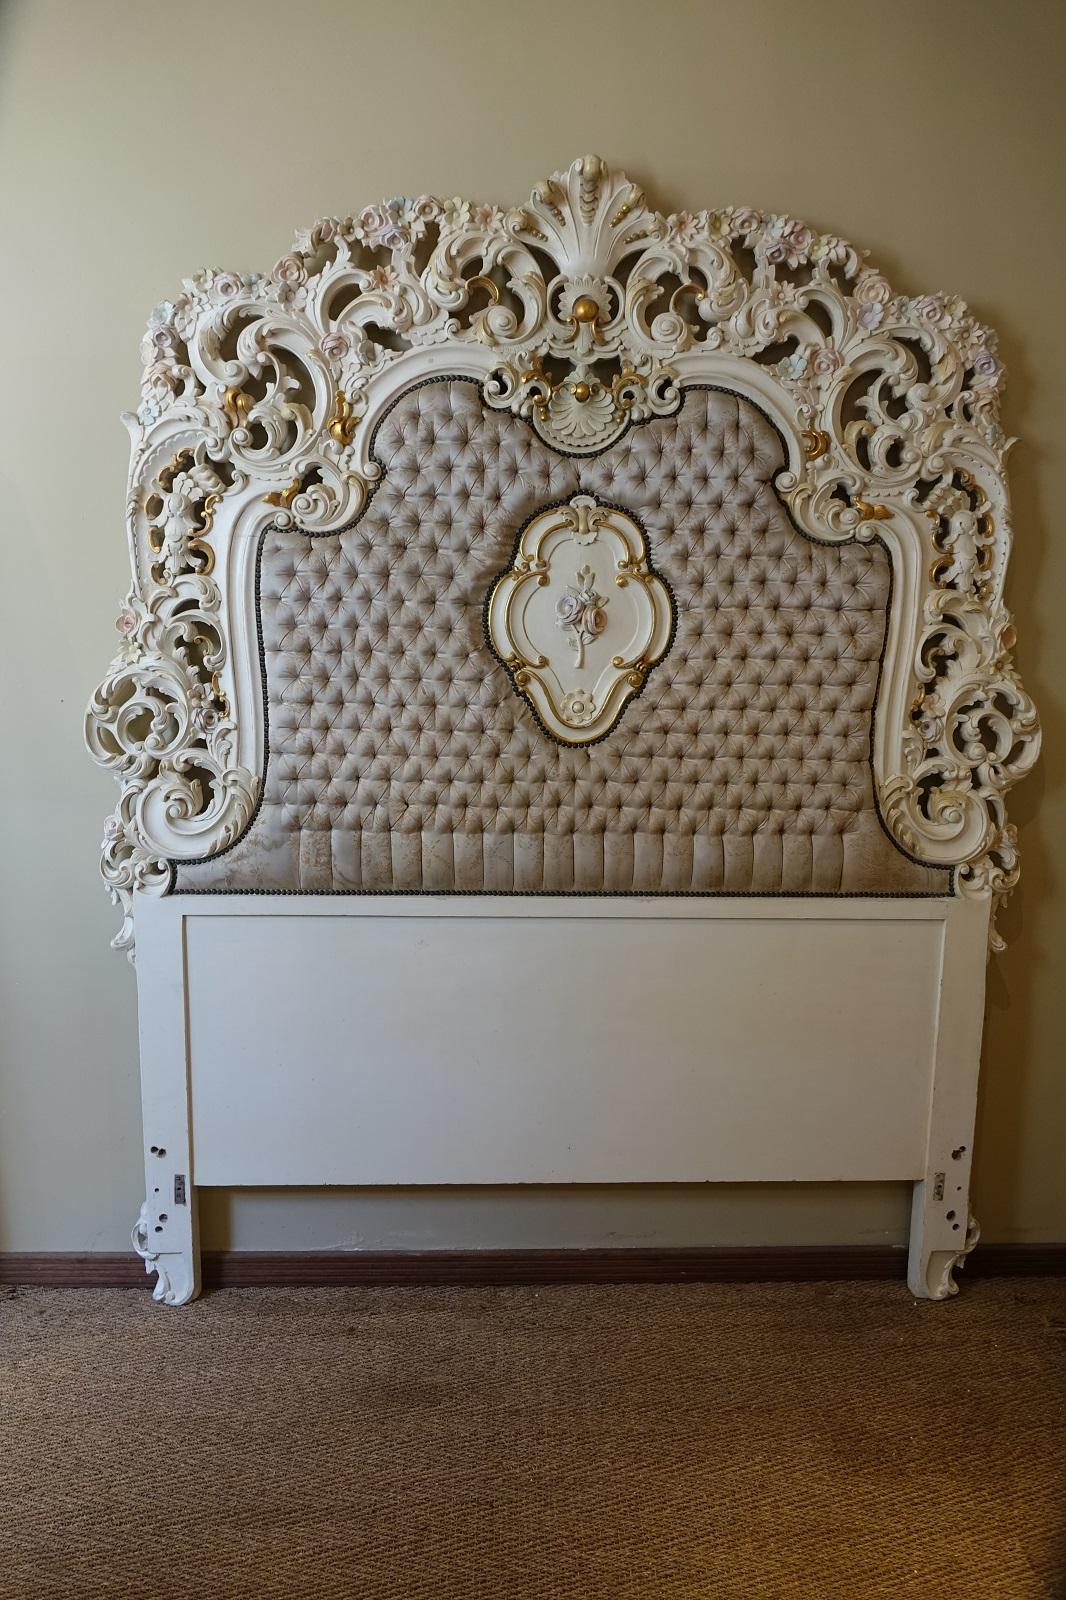 Polychromed Early 20th Century White Wood Italian Baroque Style Bedroom Set For Sale